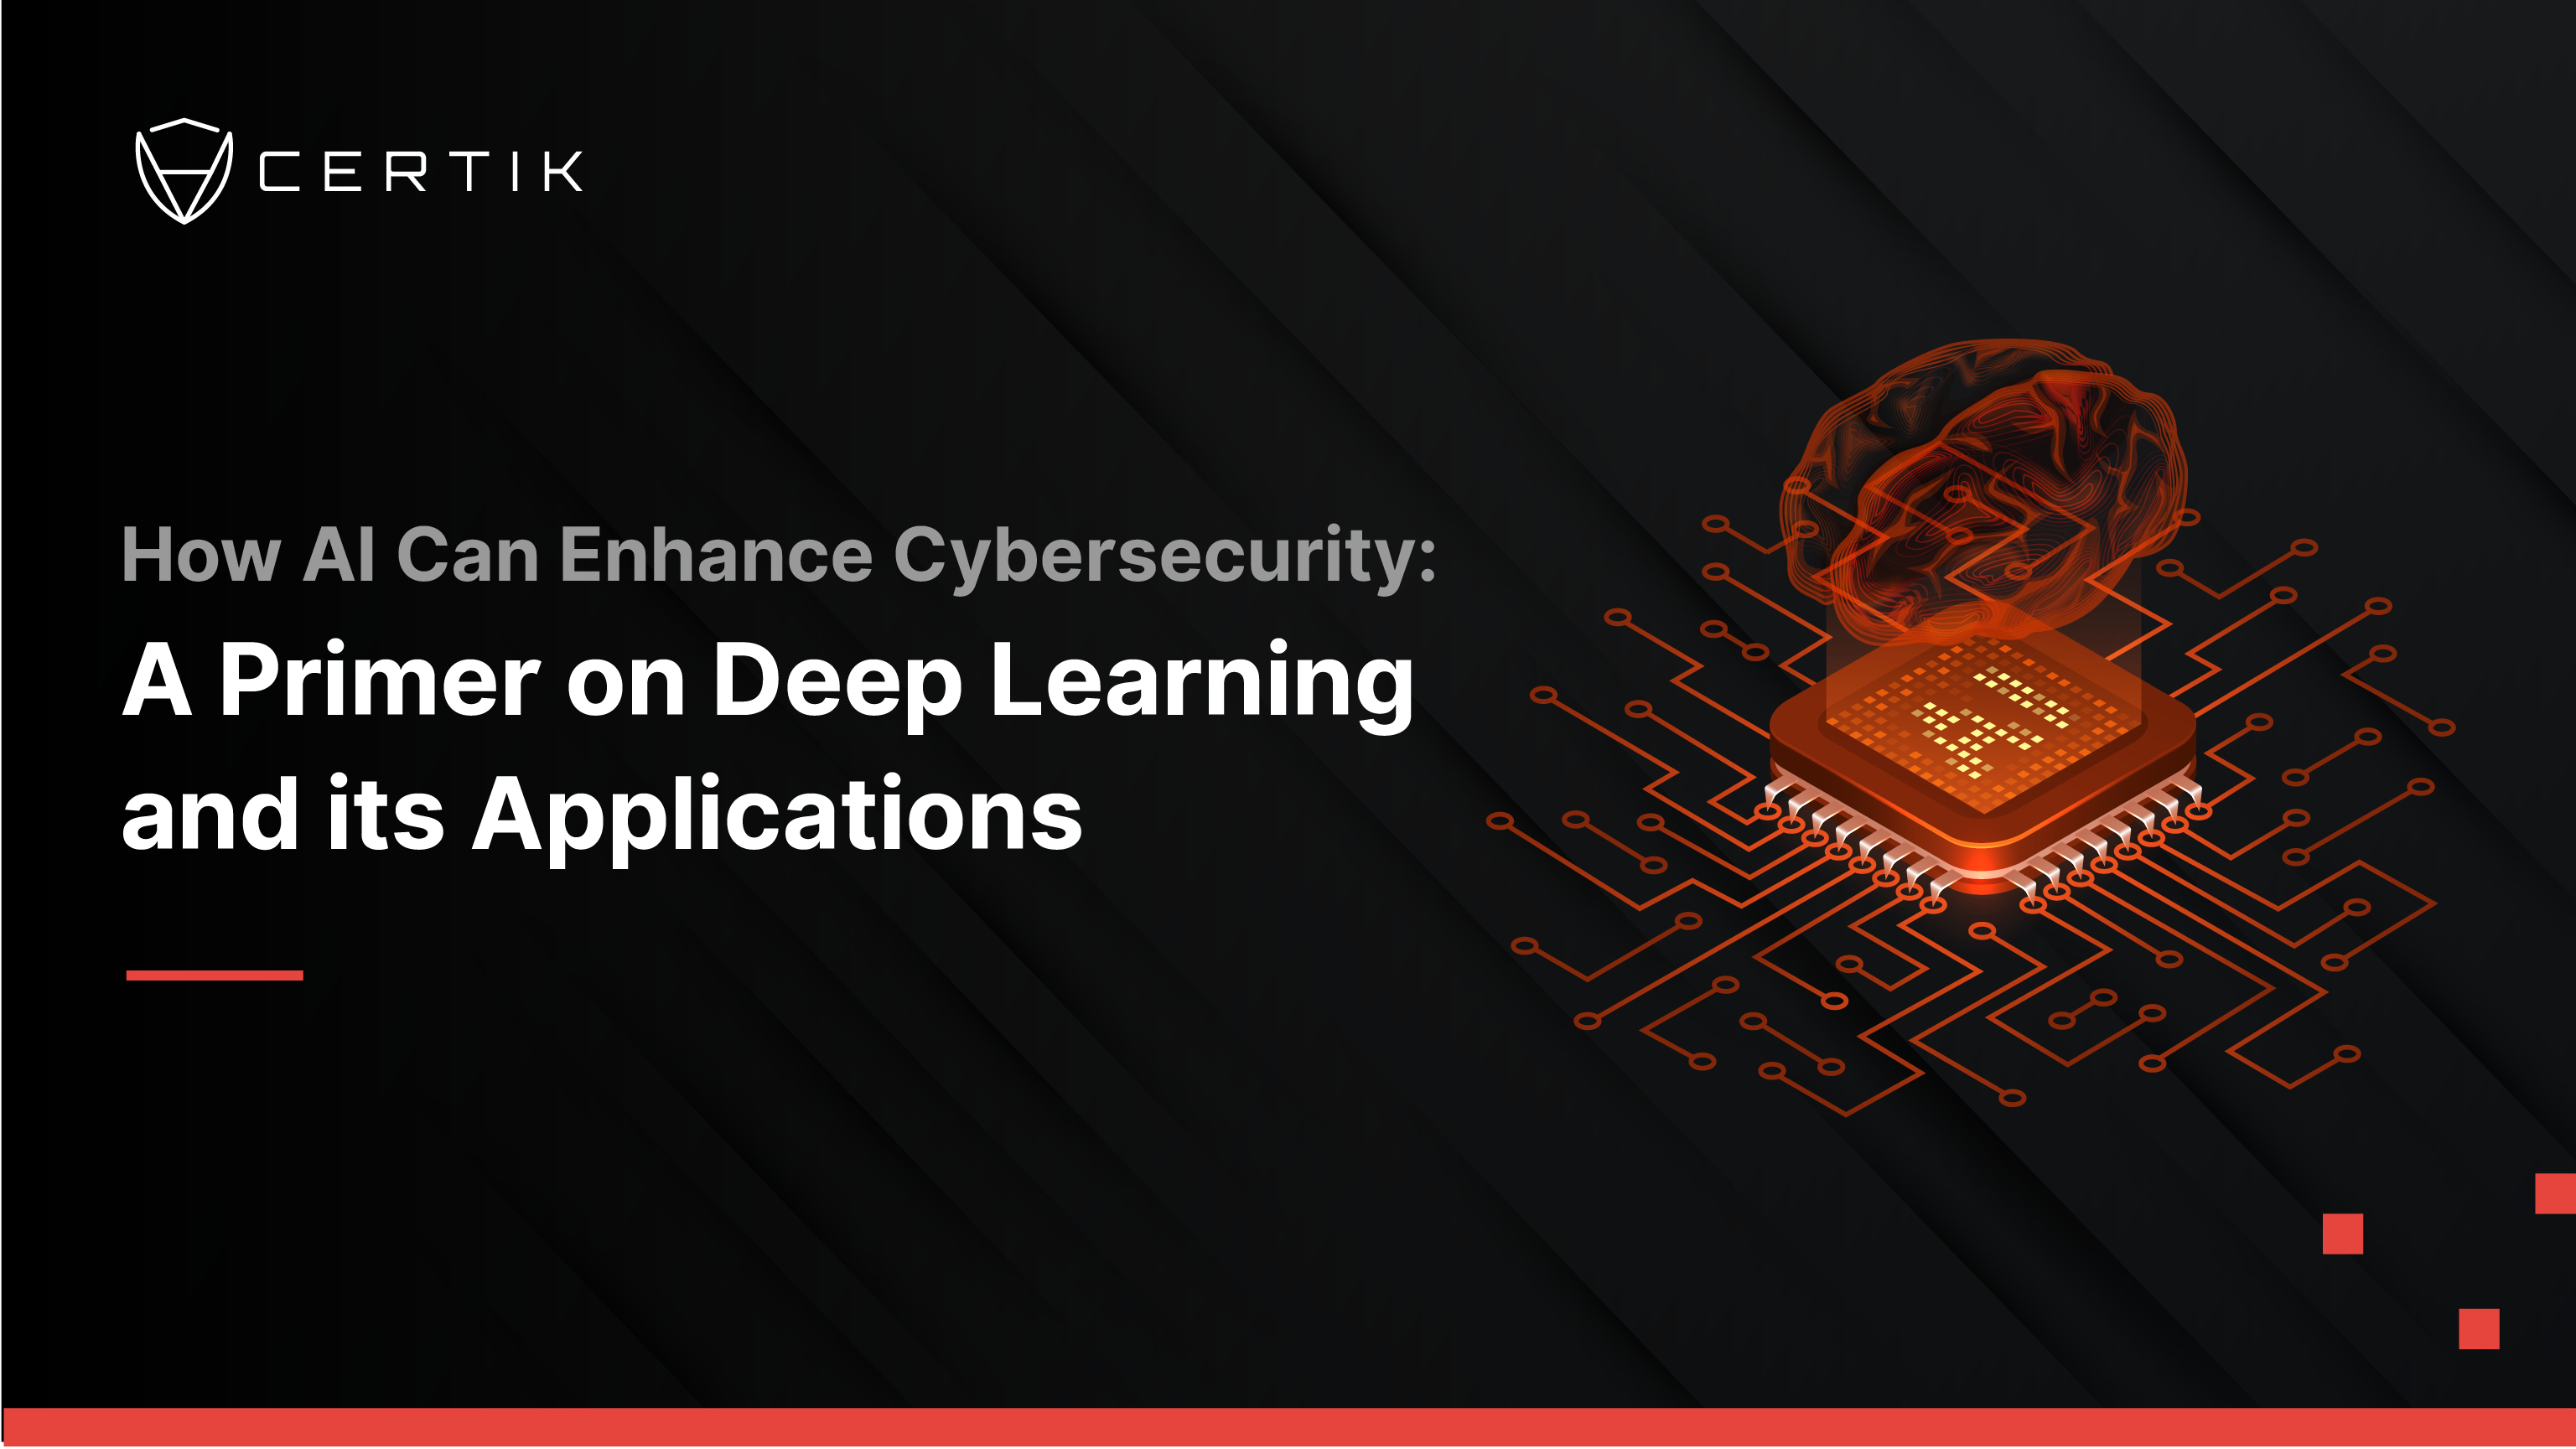 How AI Can Enhance Cybersecurity: A Primer on Deep Learning and its Applications